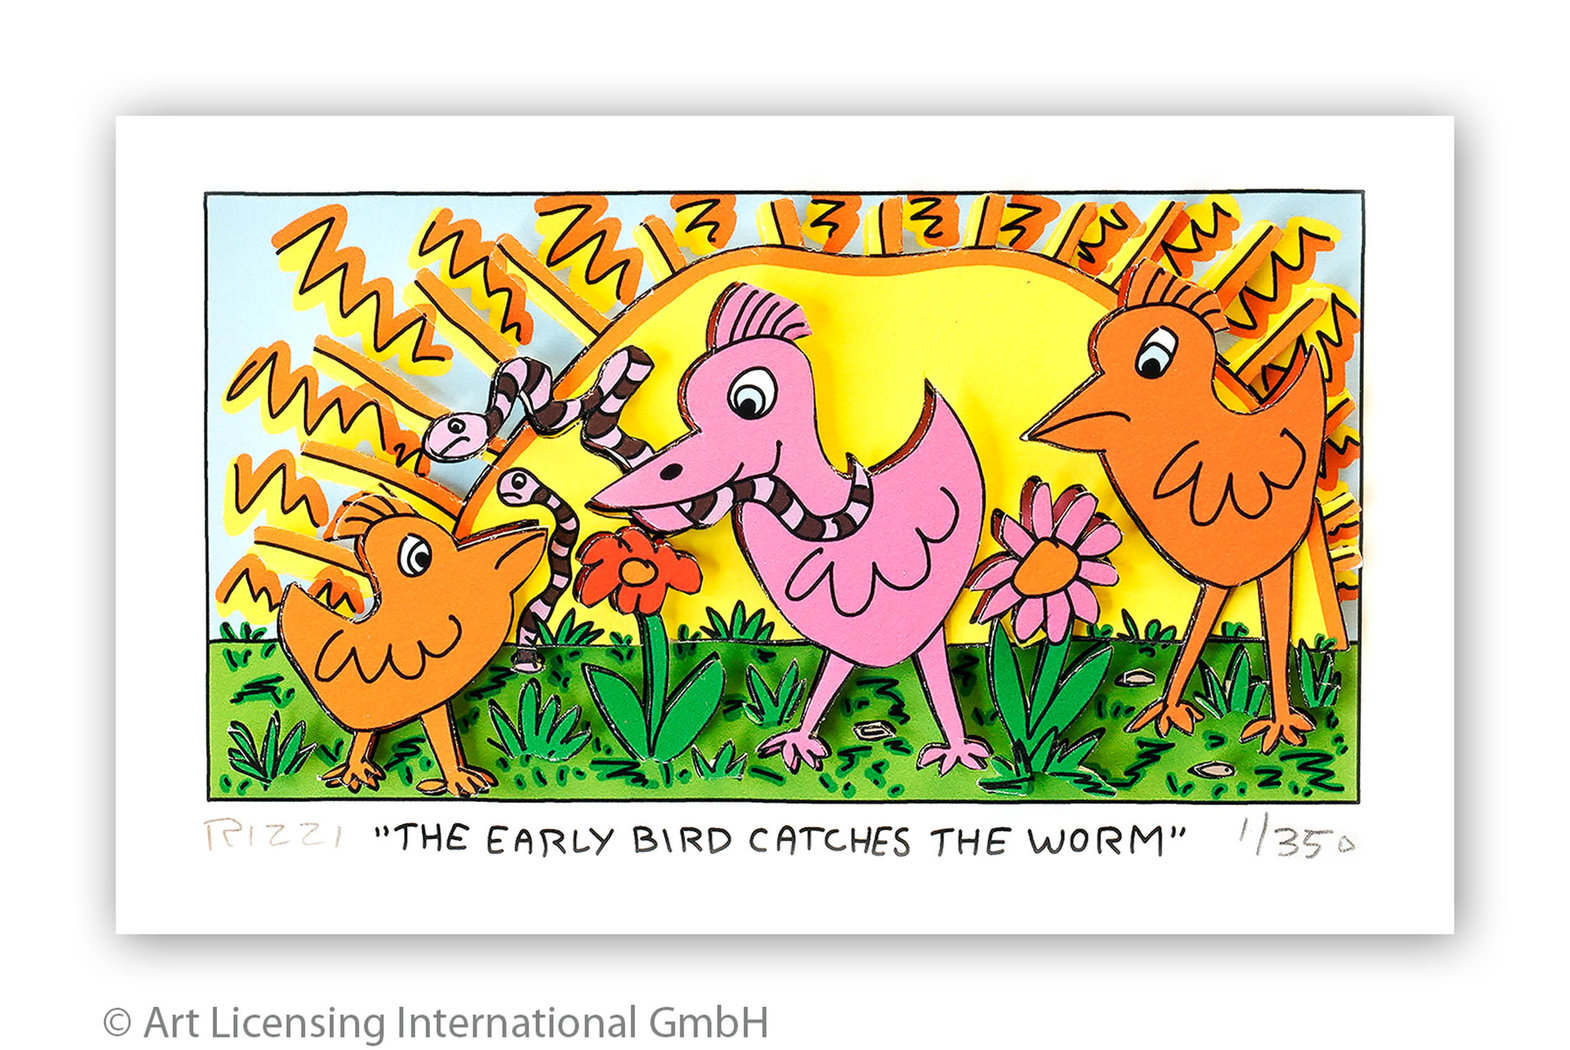 James Rizzi - THE EARLY BIRD CATCHES THE WORM